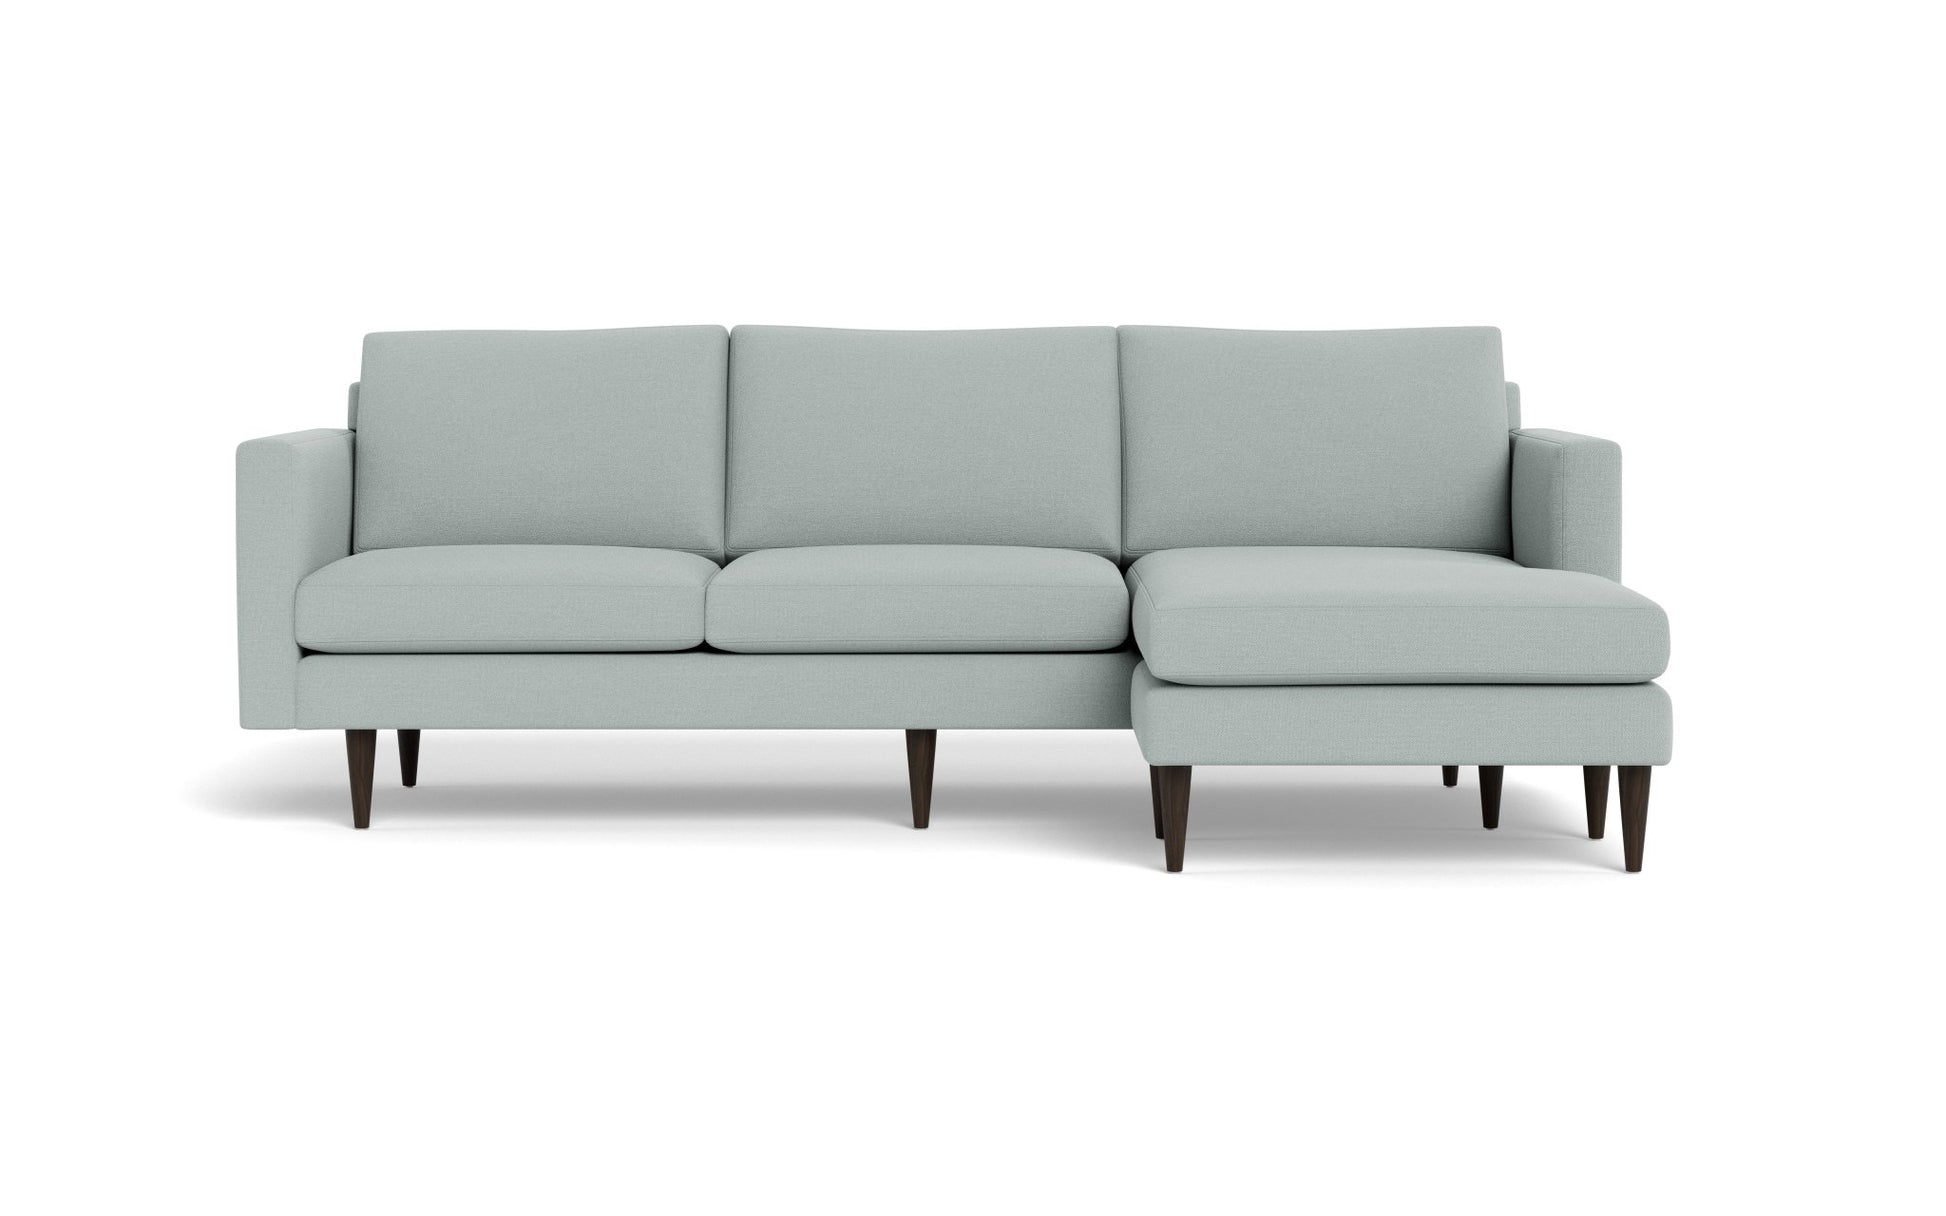 Wallace Untufted Reversible Chaise Sofa - Peyton Light Blue